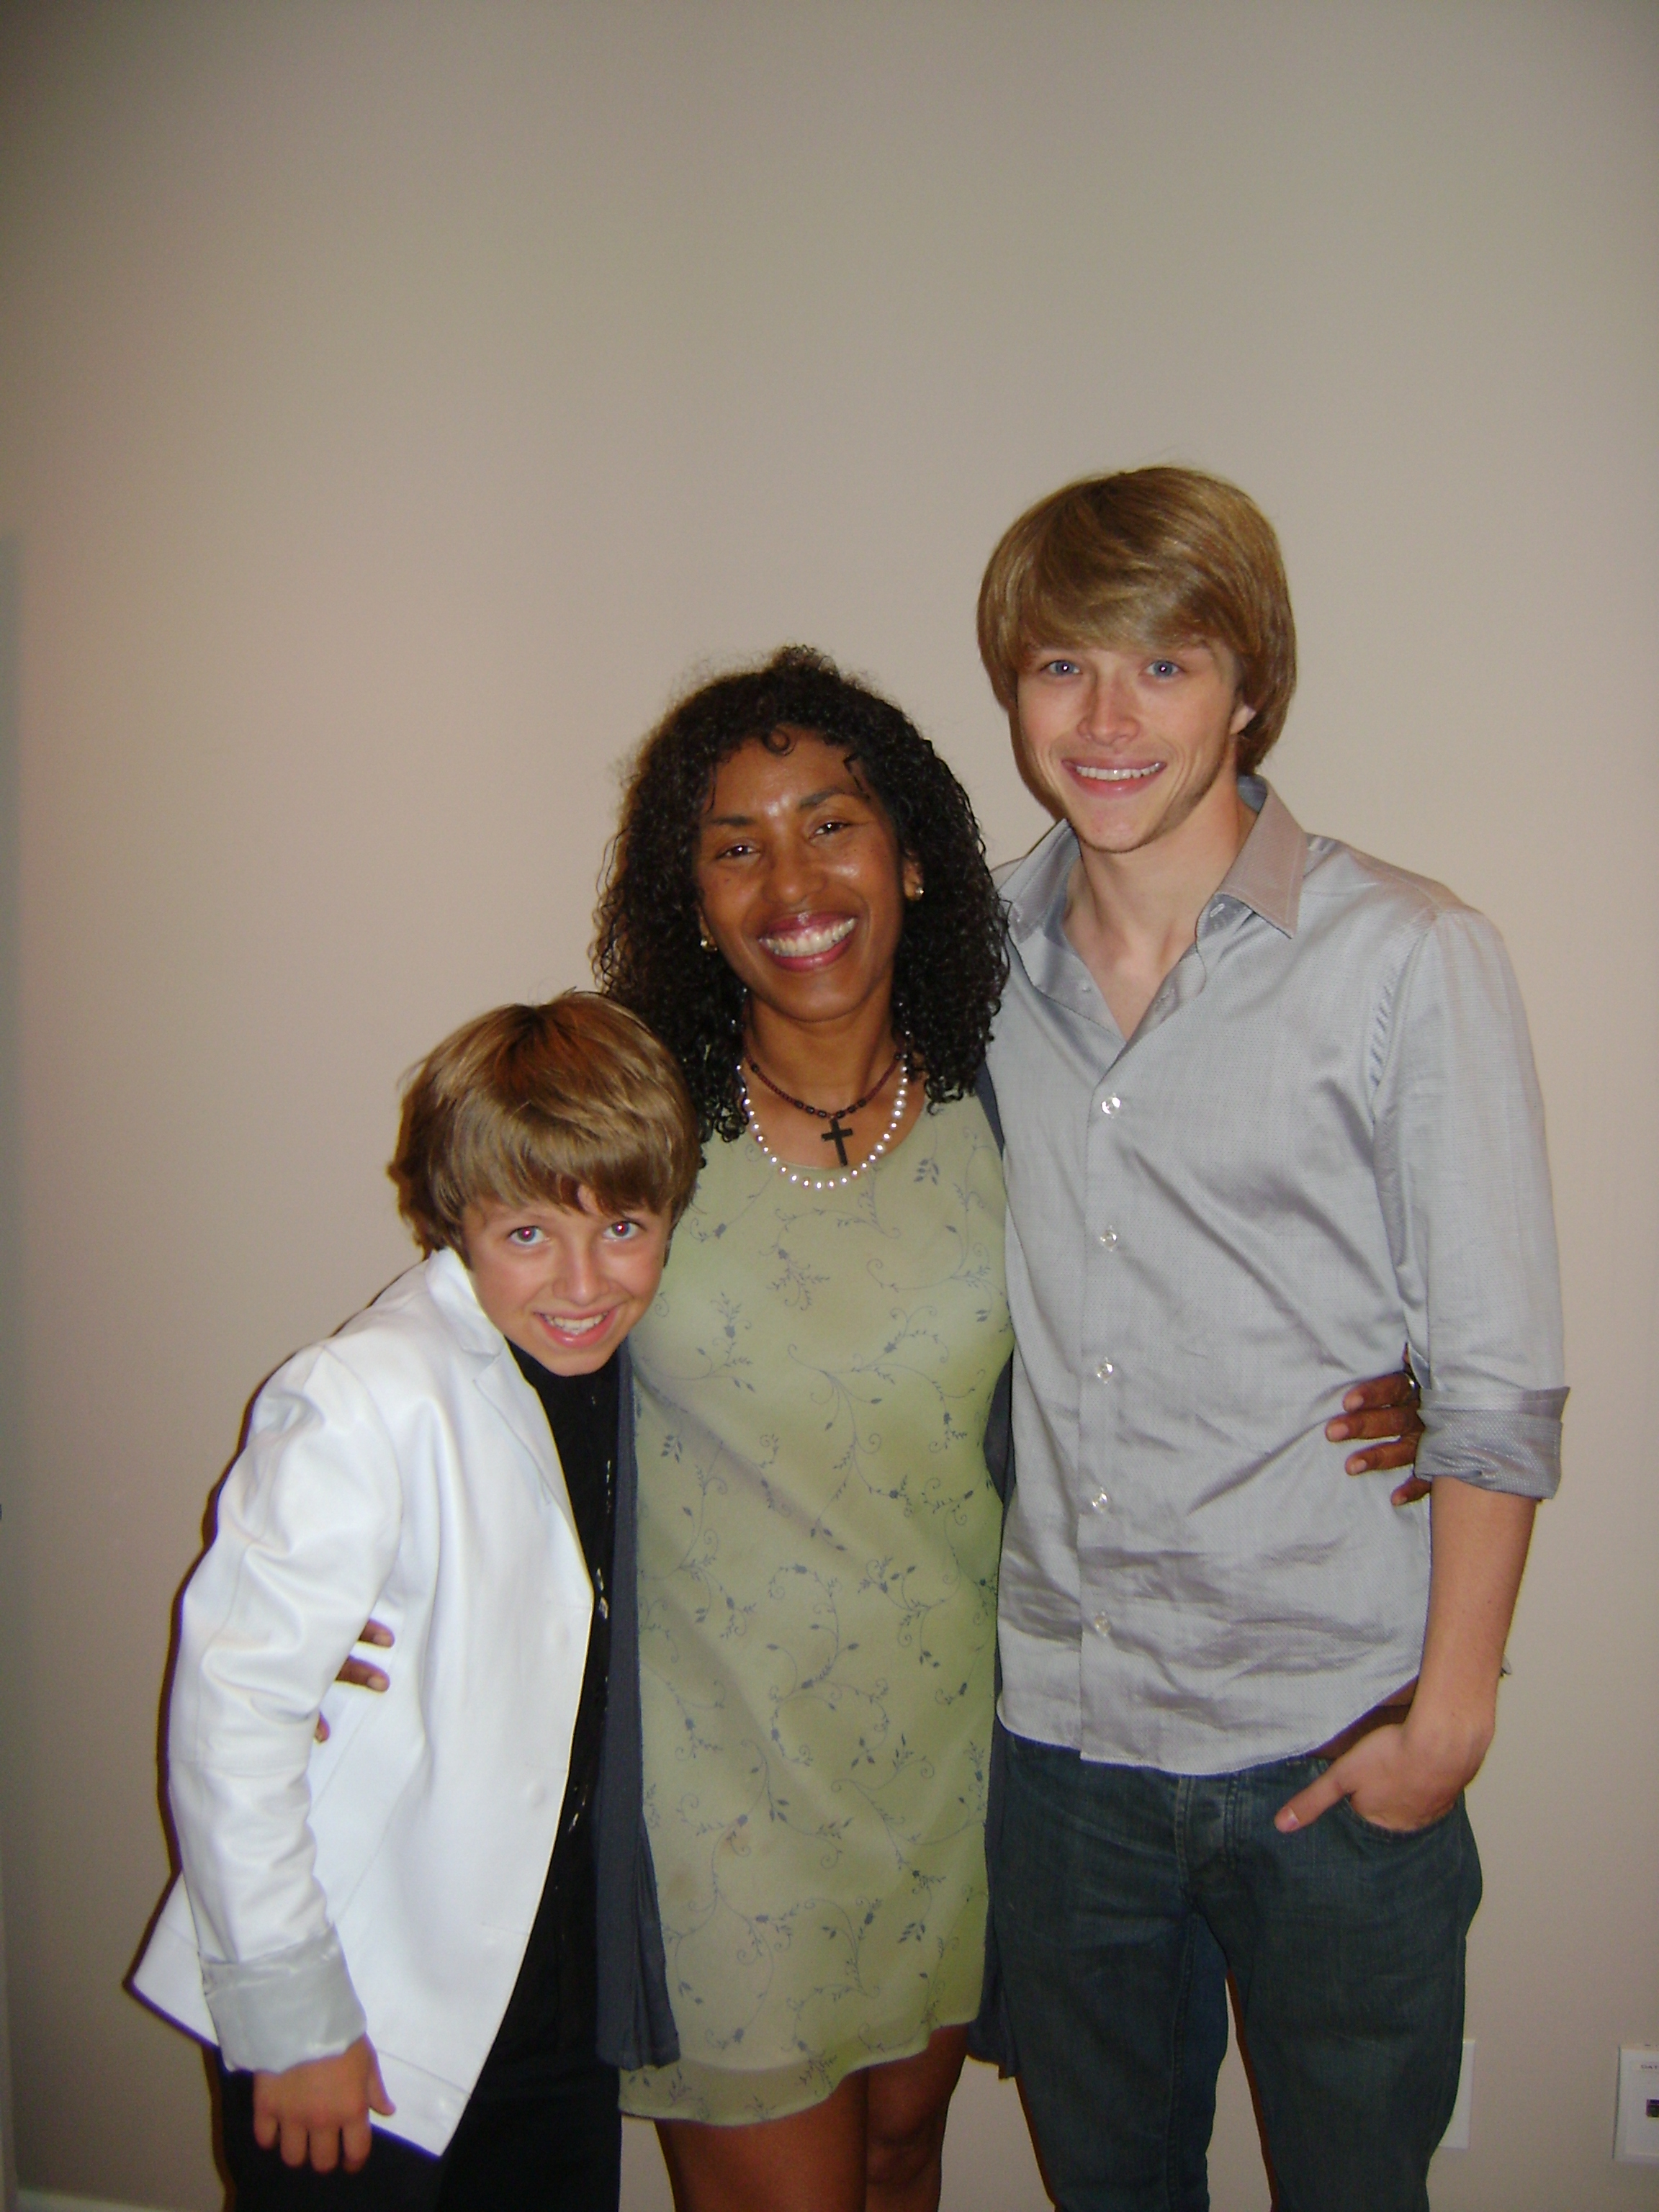 Austin on the set of Elle: A Modern Cinderella Tale with his manager, Tina Treadwell and Sterling Knight